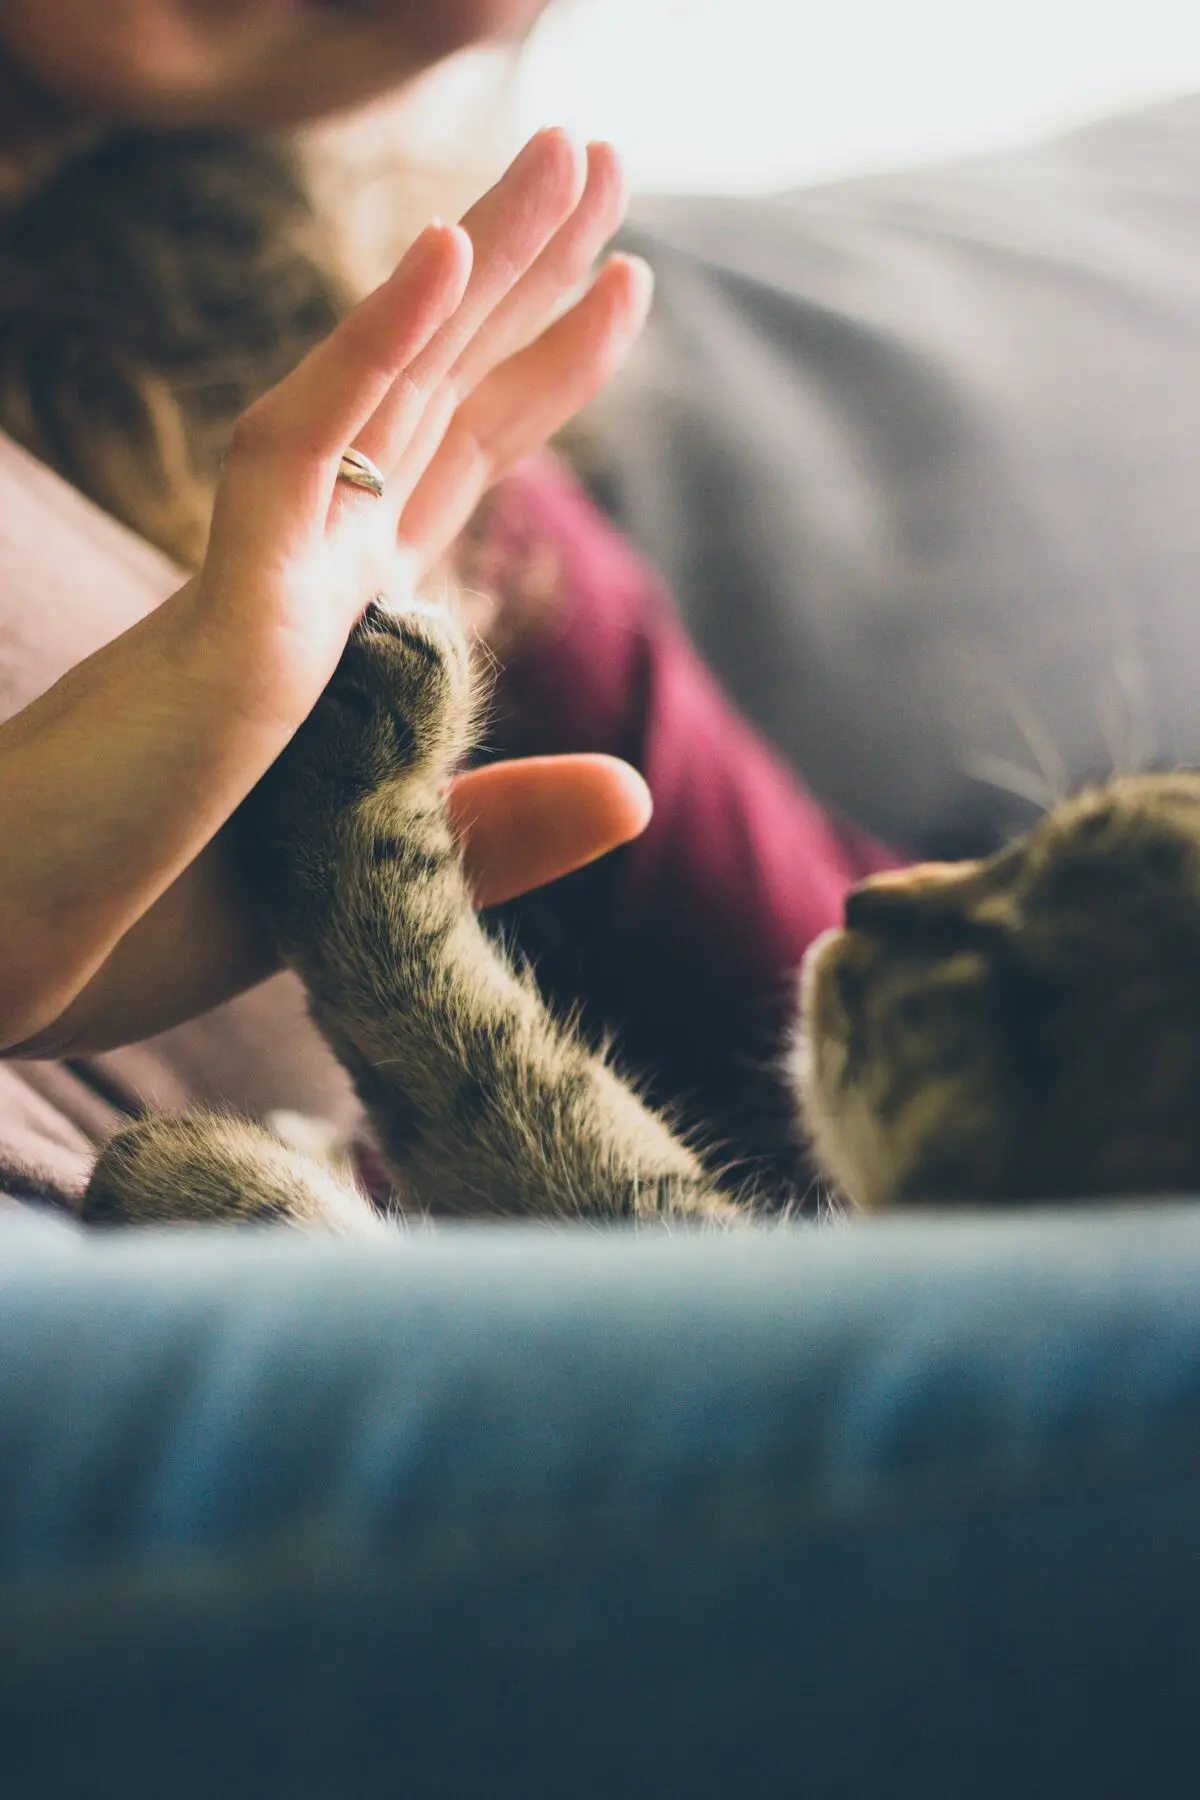 Life Insurance for Pets: How to Provide For Your Pet After You're Gone